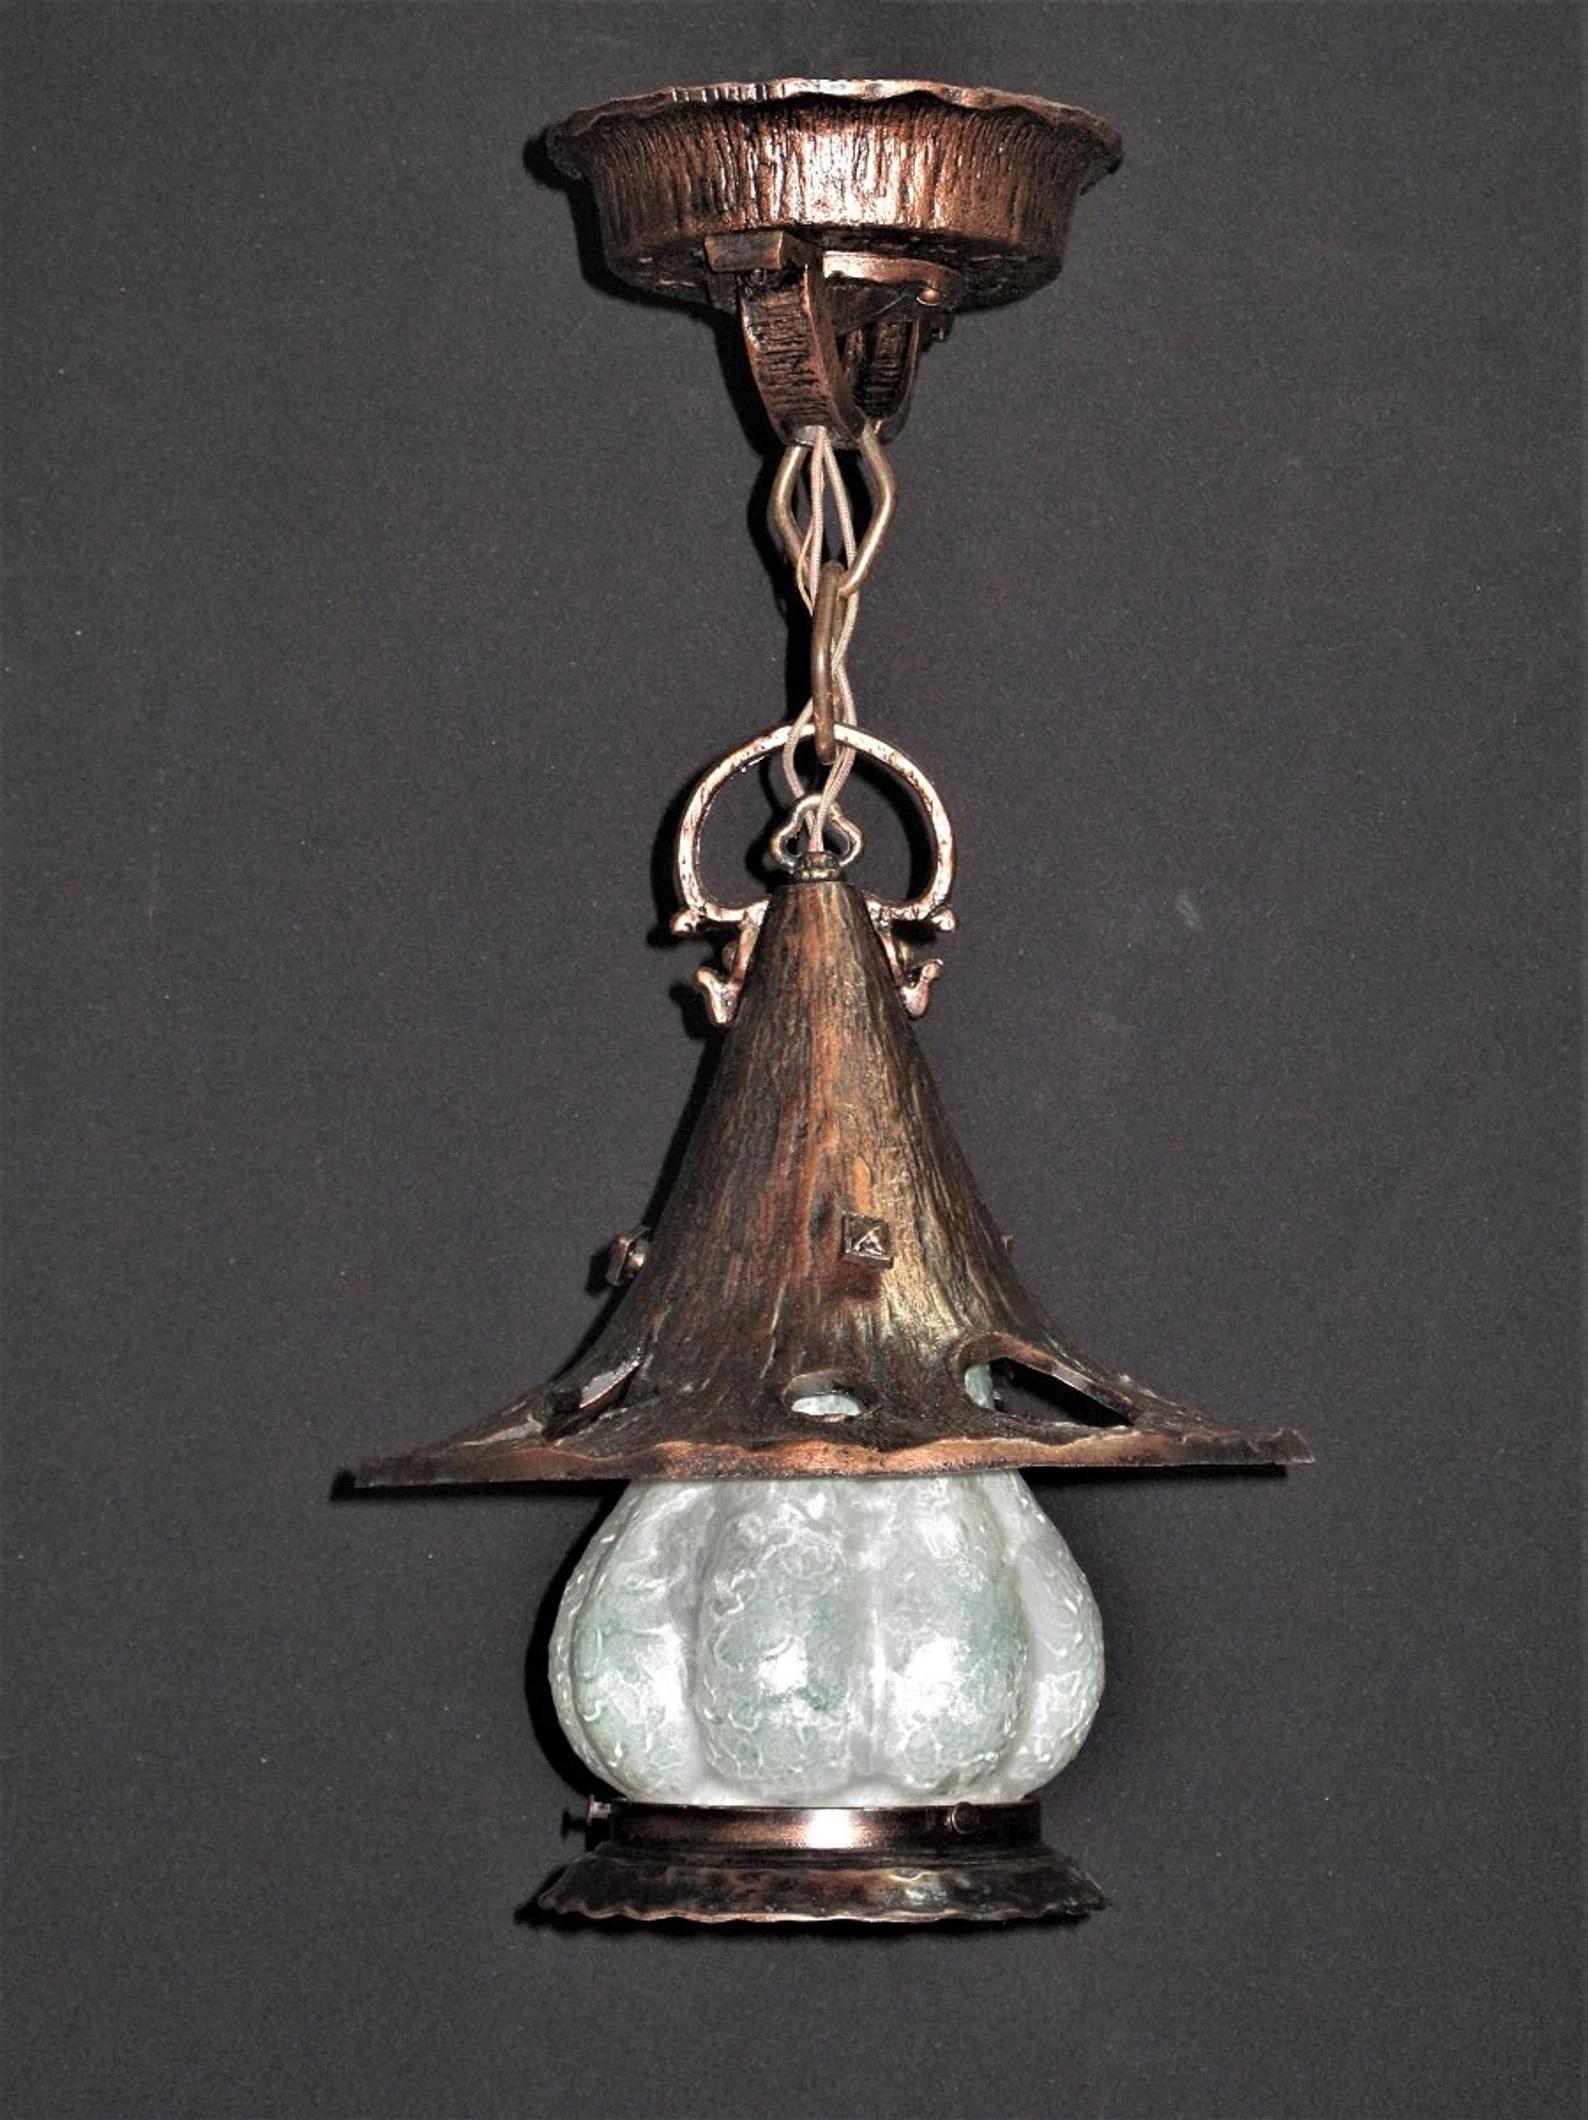 Cast 1920s / 30s Storybook Style Witches Hat Porch Light with Moon Sun & Stars